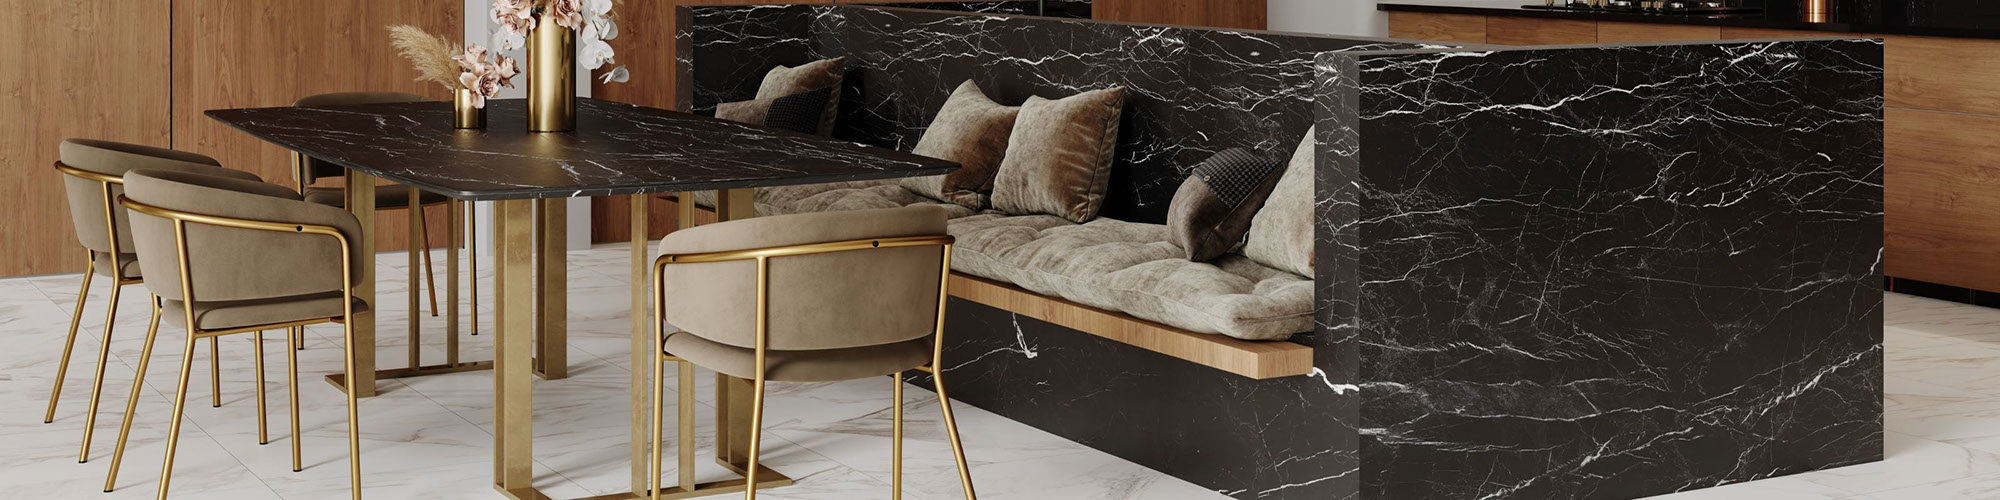 Elegant dining room with floor tile that looks like white marble, table top & sofa frame made of porcelain slab that looks like black marble with white veining, tan suede sofa cushions & chairs.